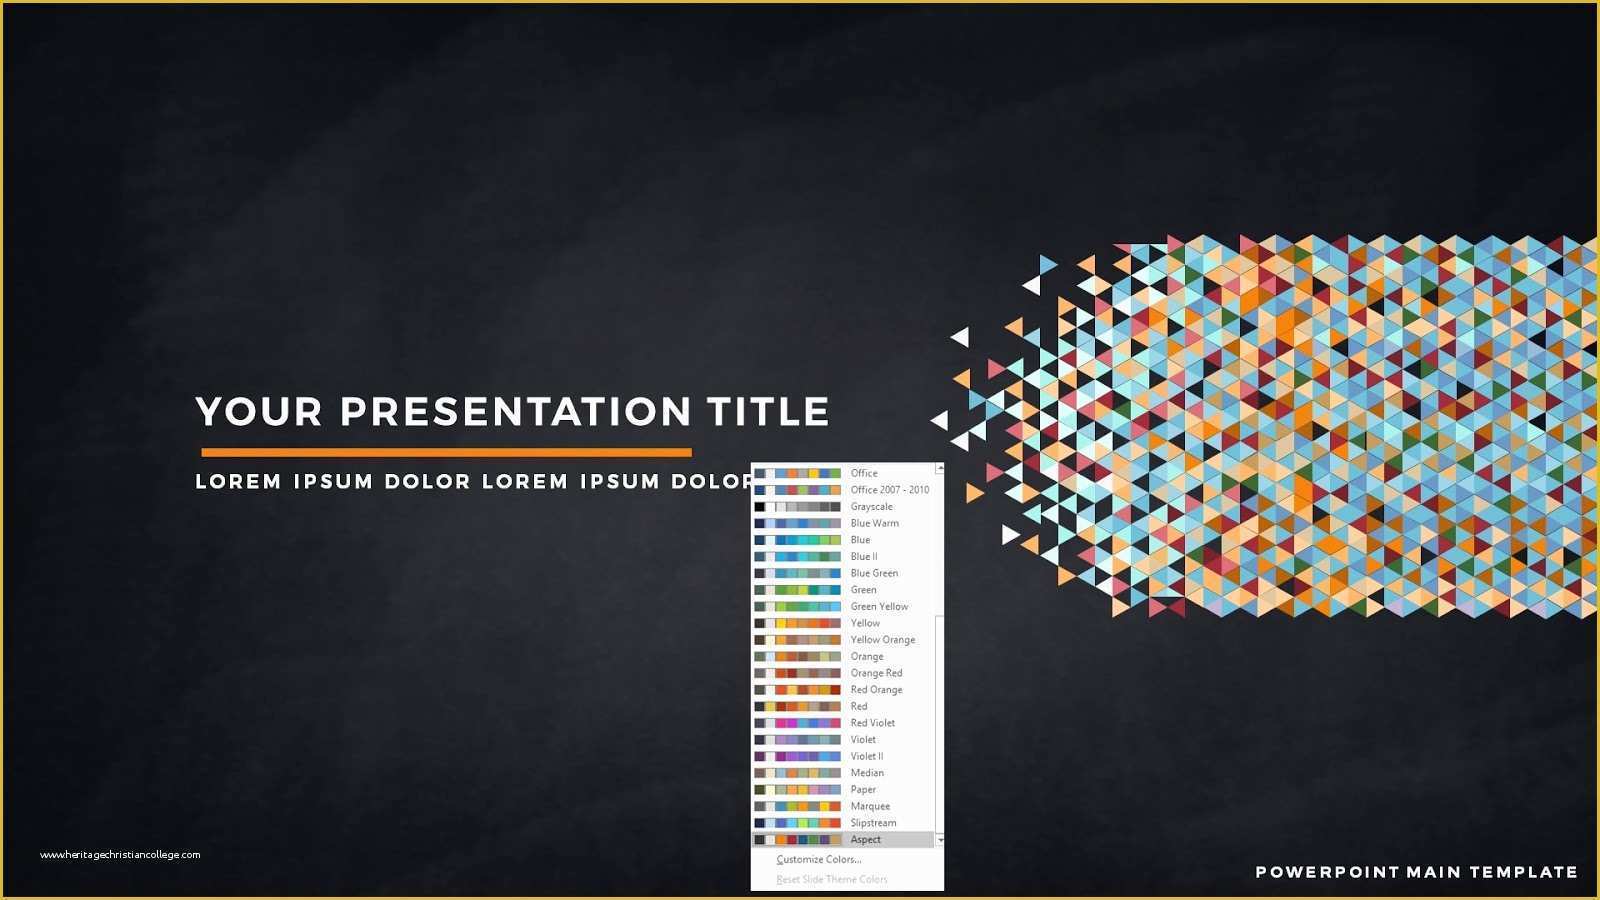 Free Alzheimer Powerpoint Template Of Free Powerpoint Template with Polygonal Presentation Title